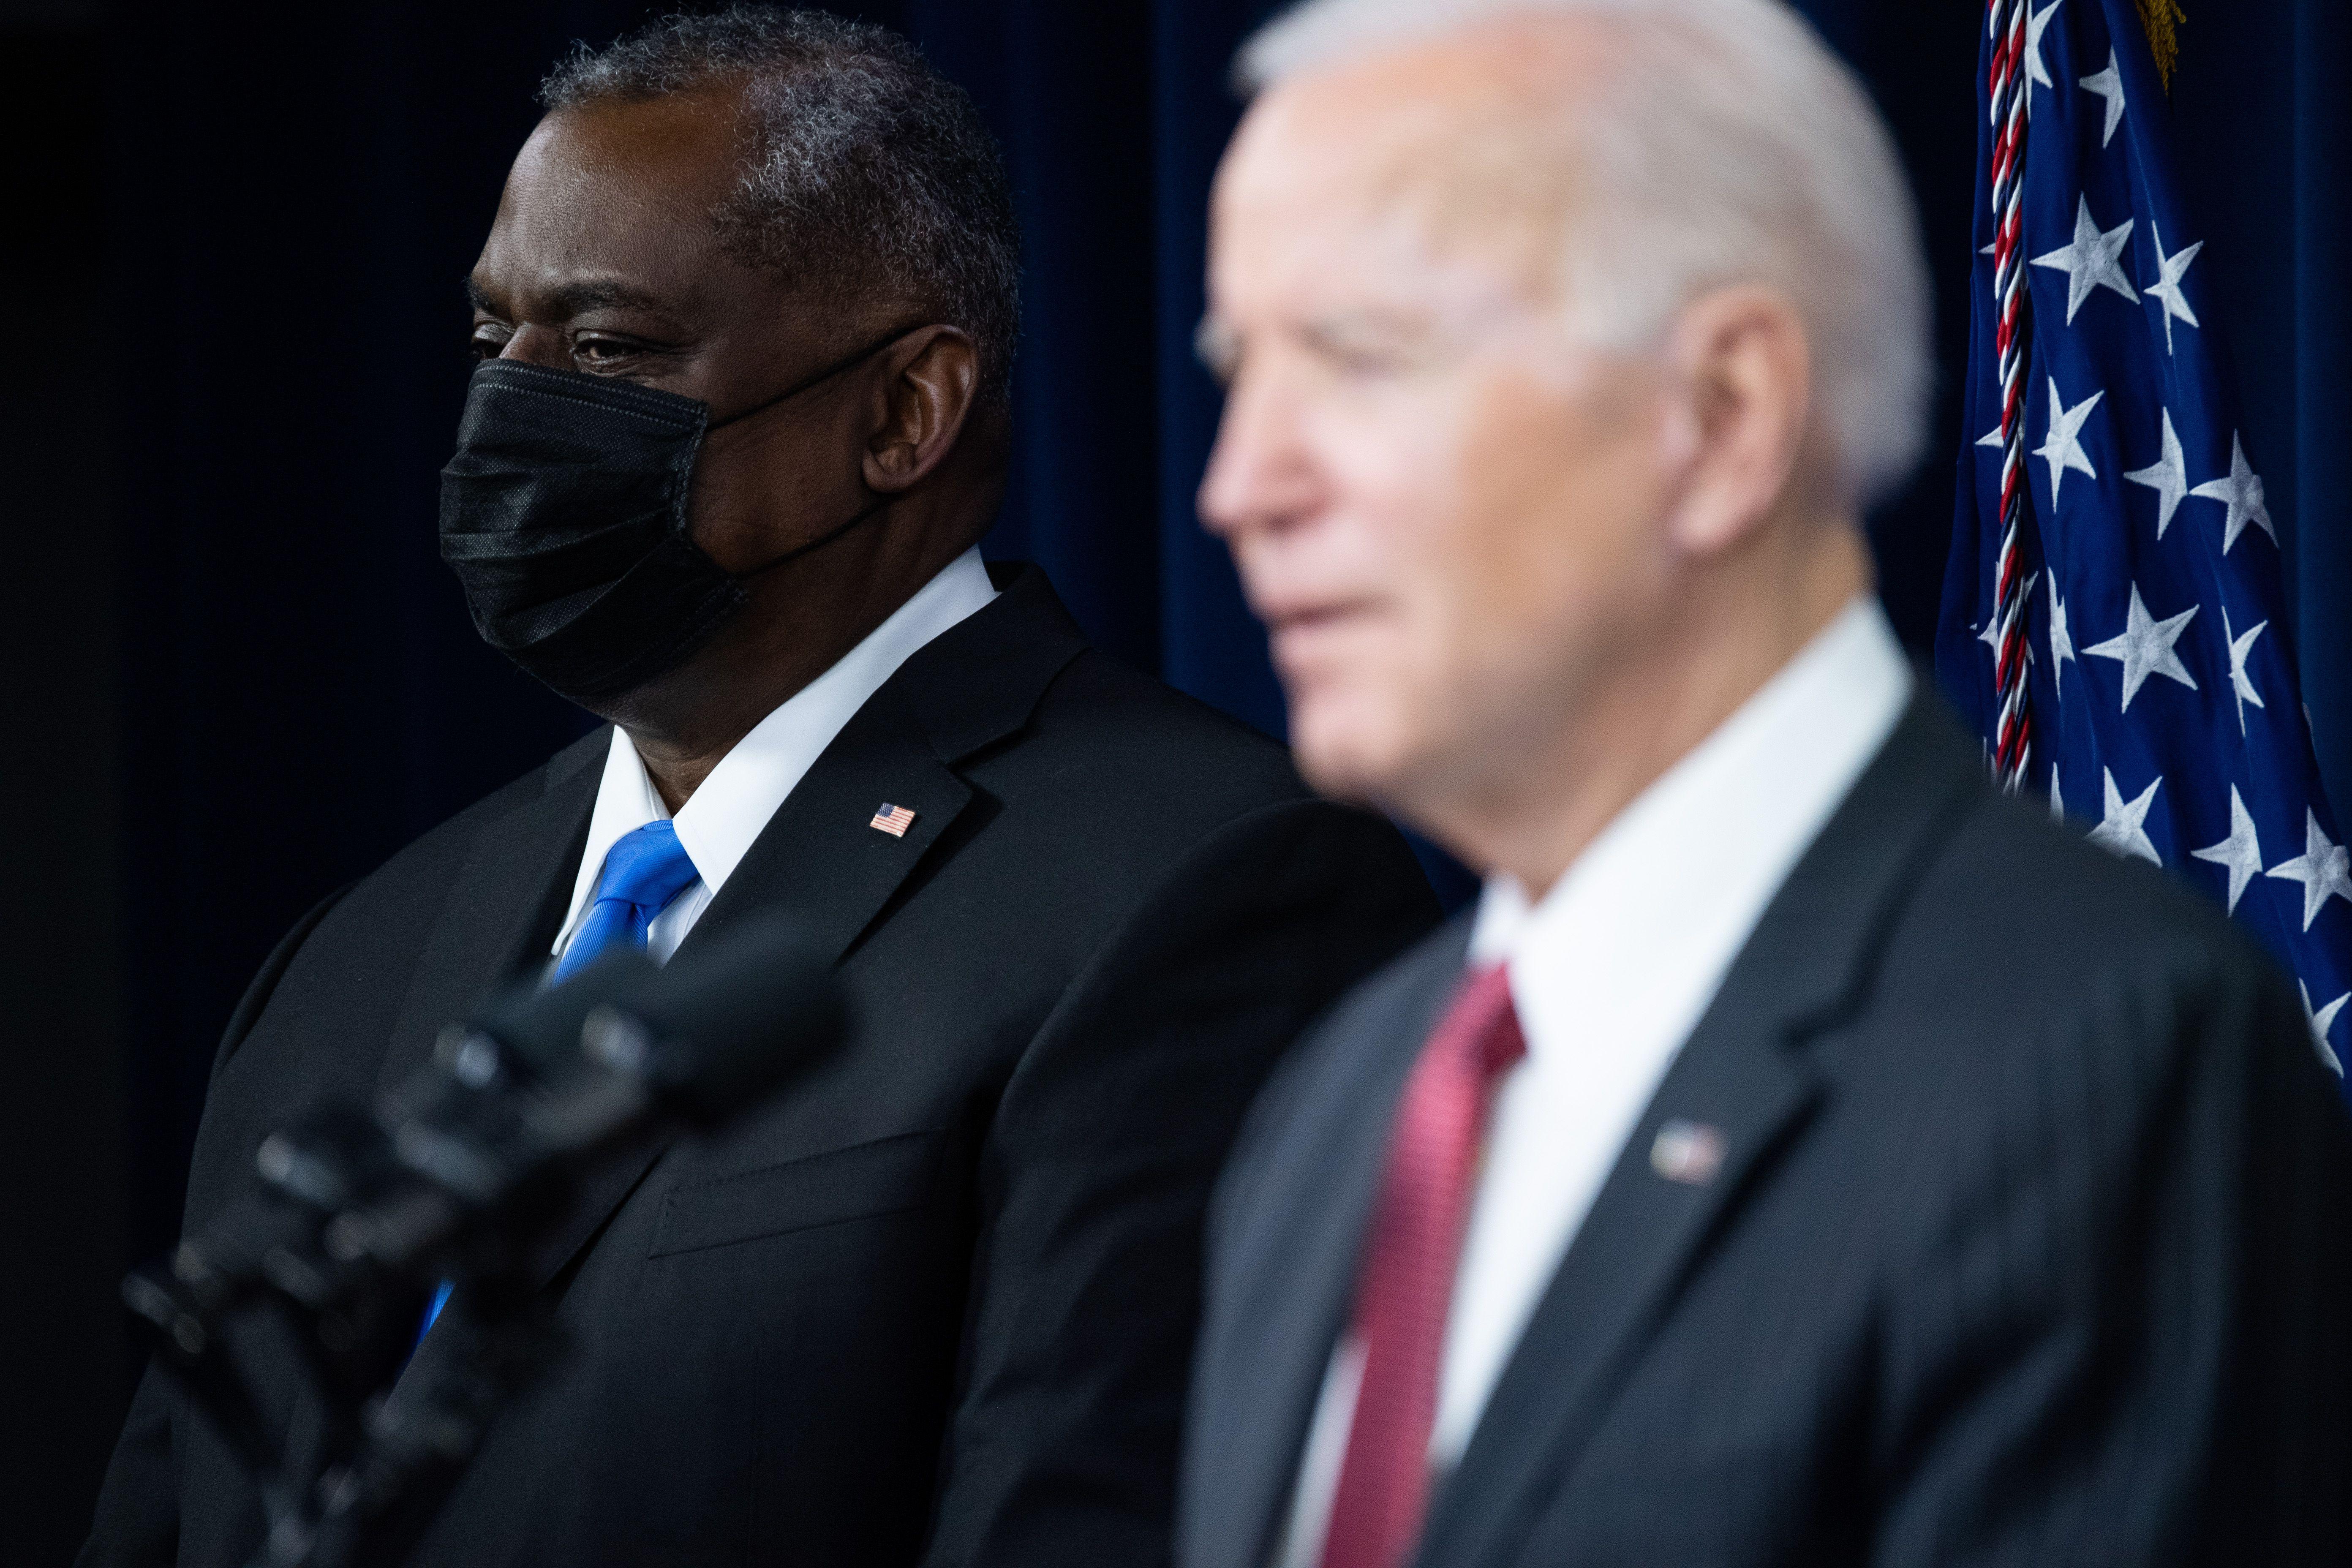 Biden speaks in the foreground and Secretary of Defense Lloyd Austin, wearing a black mask, stands in the background during a press conference at the Pentagon.